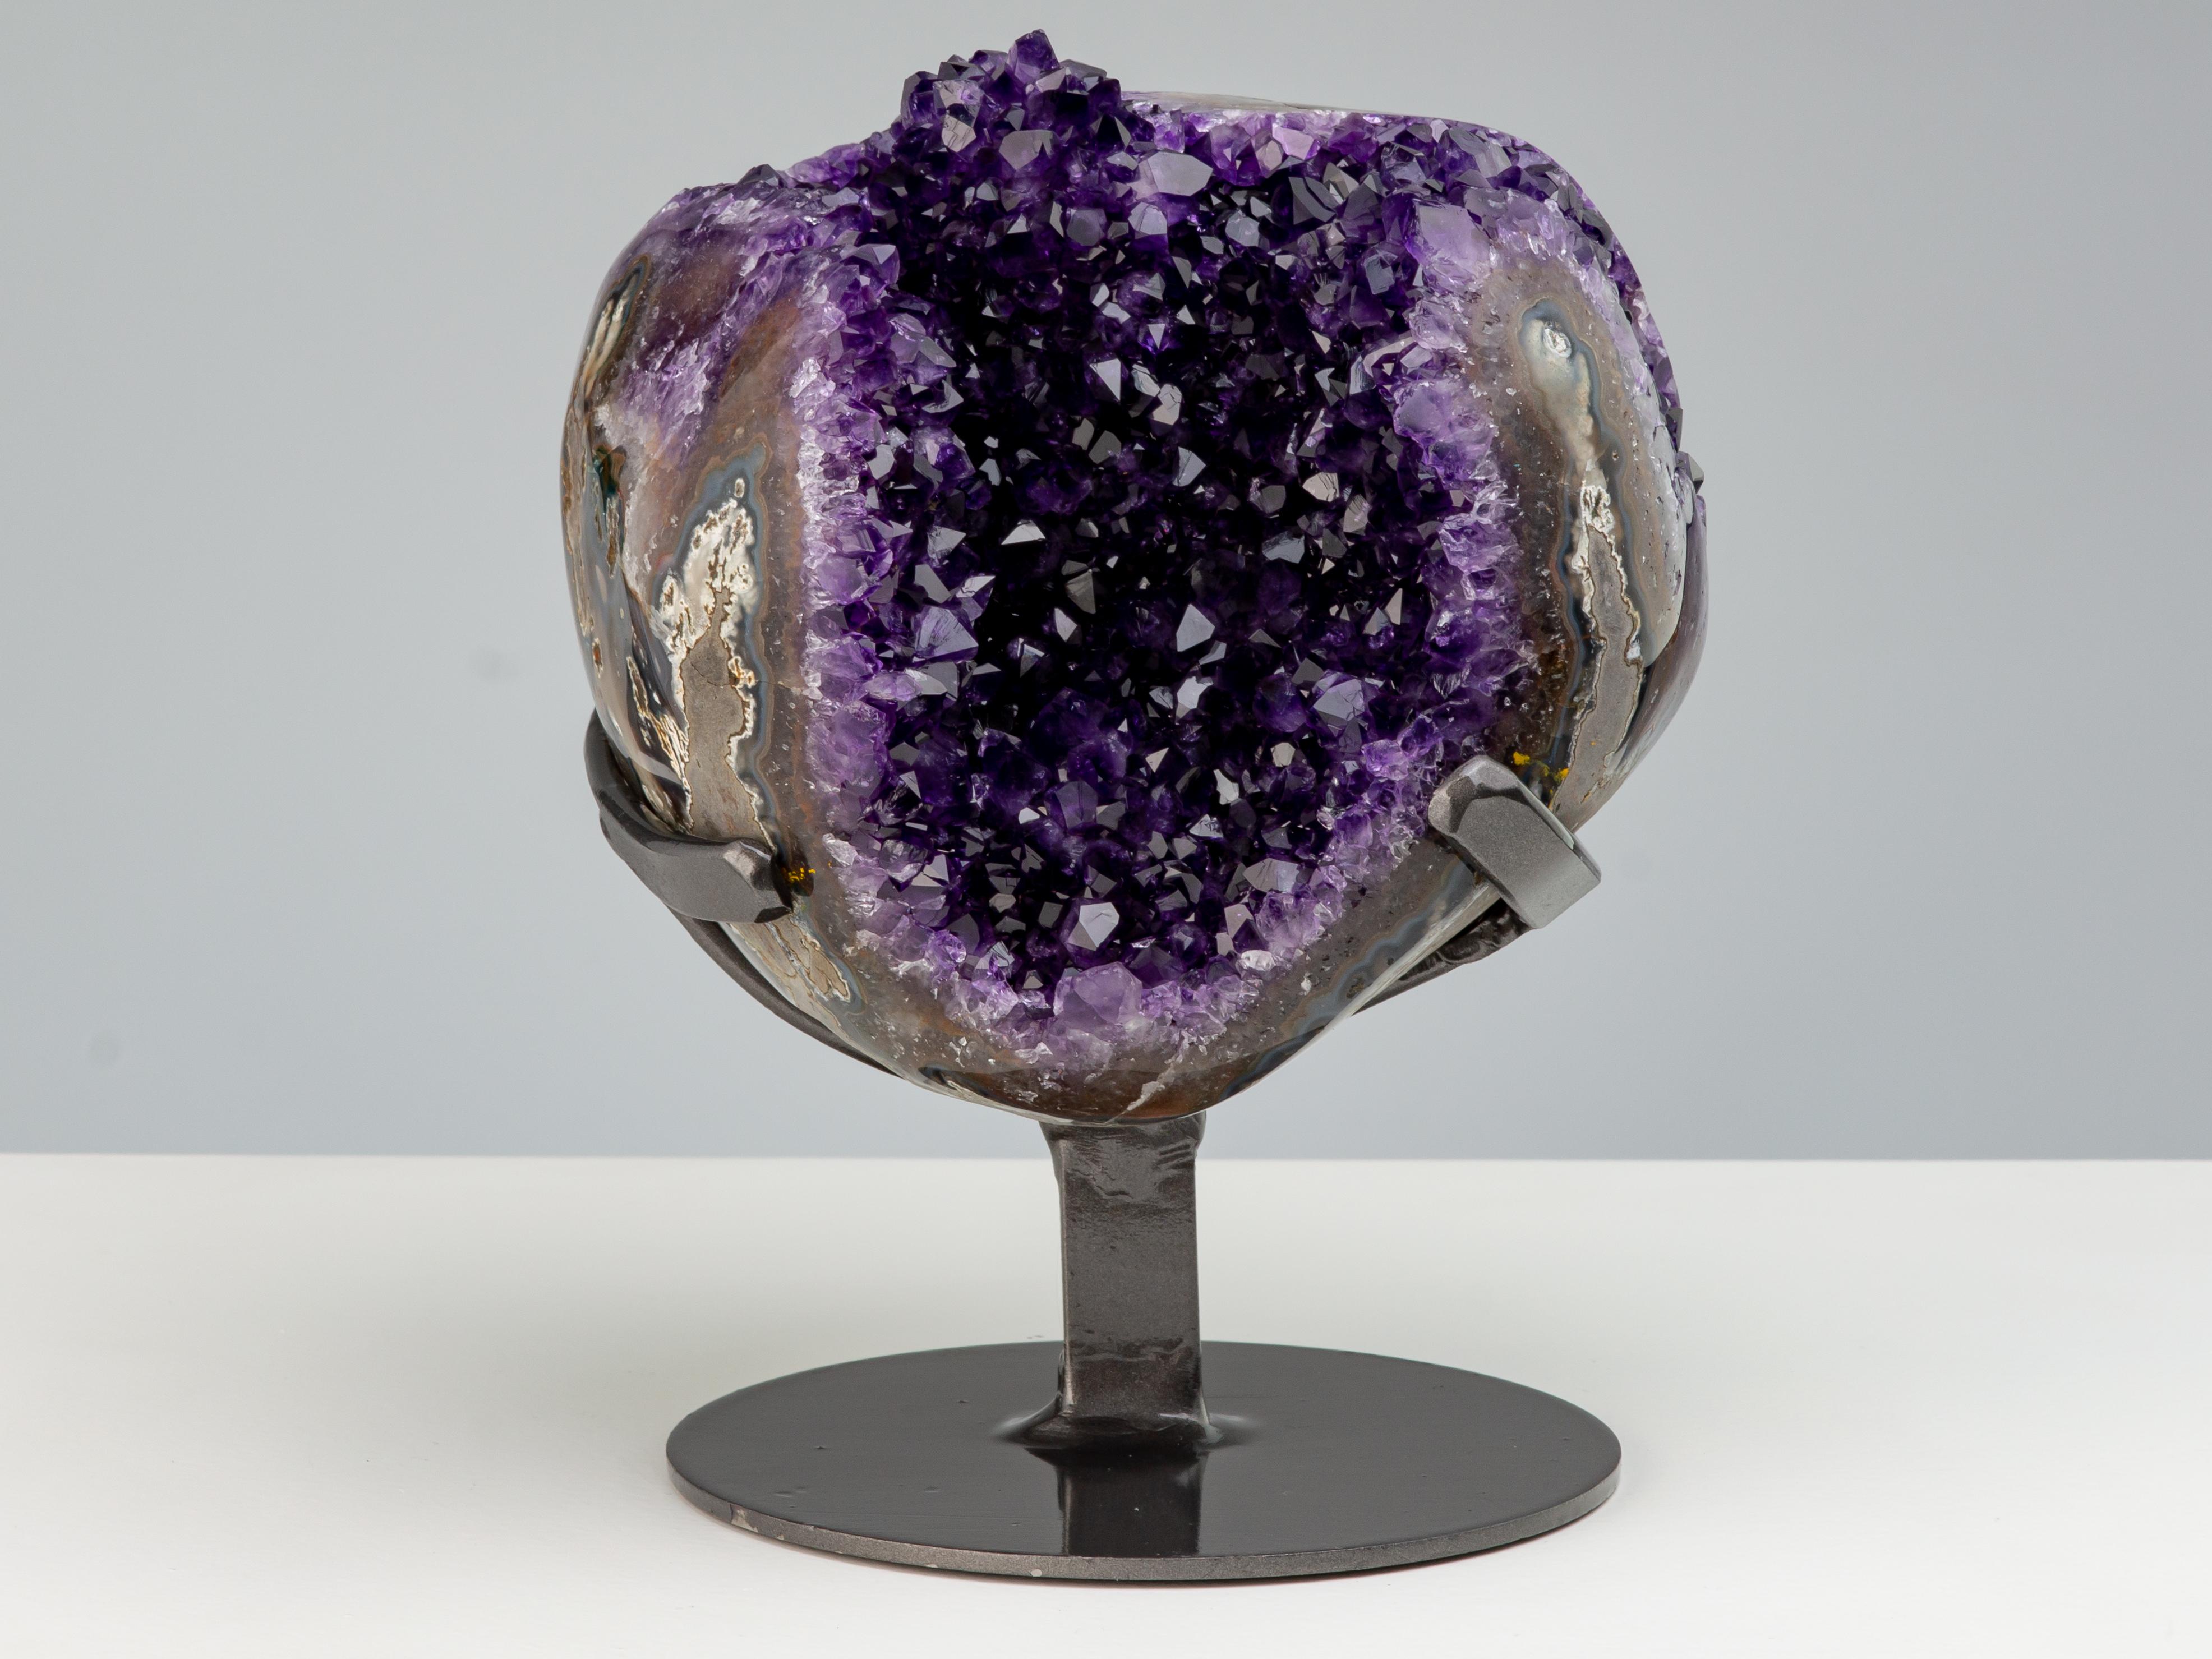 Uruguayan Geode with deep purple amethyst crystals, a central stalactite and agate borders For Sale